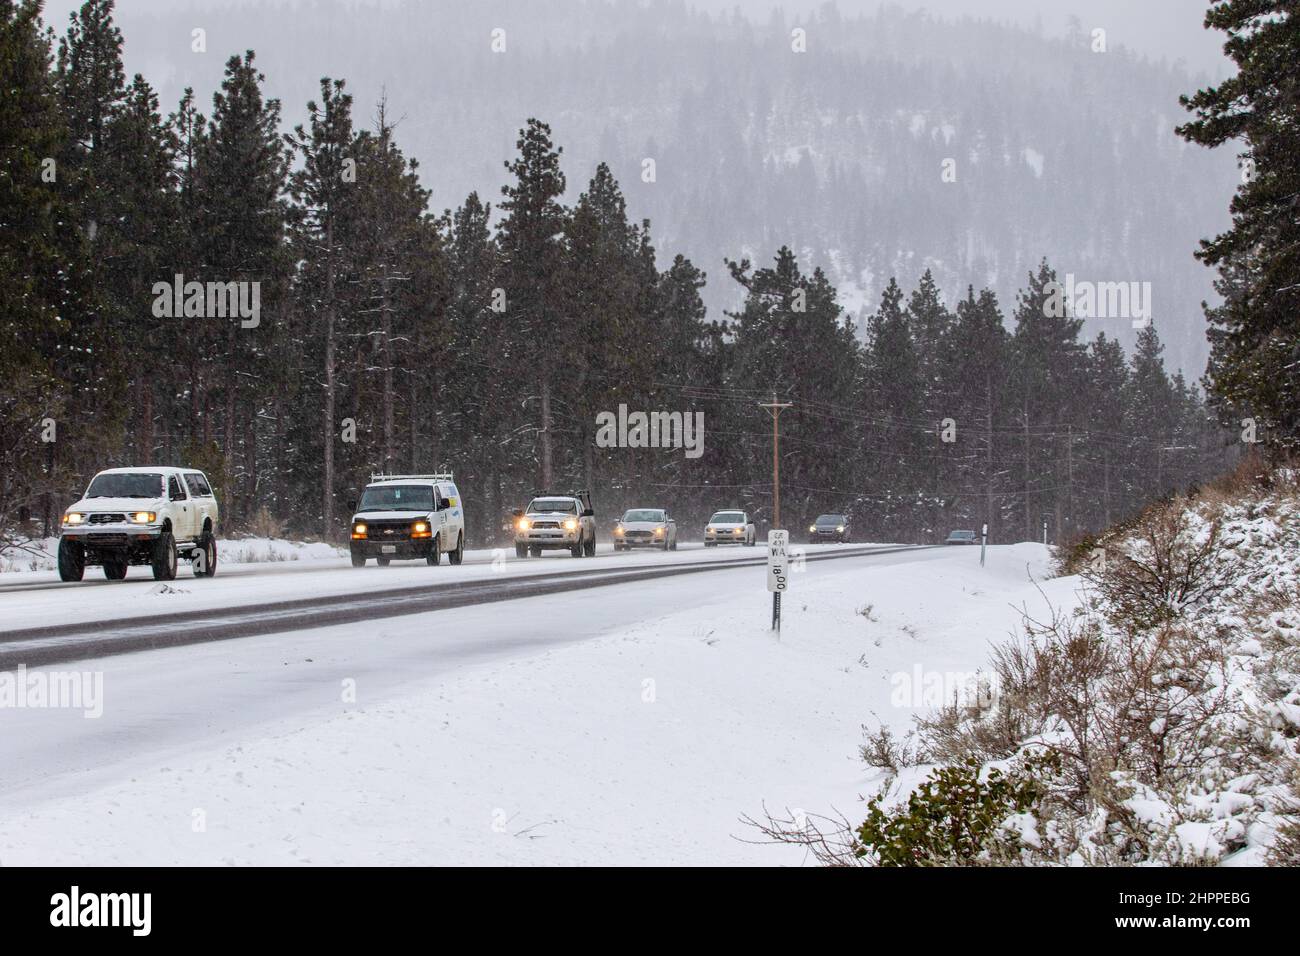 Reno, United States. 22nd Feb, 2022. A line of cars descend a mountain road  in winter weather. Winter road conditions worsen as snow falls in the  mountains. Chains where required on all